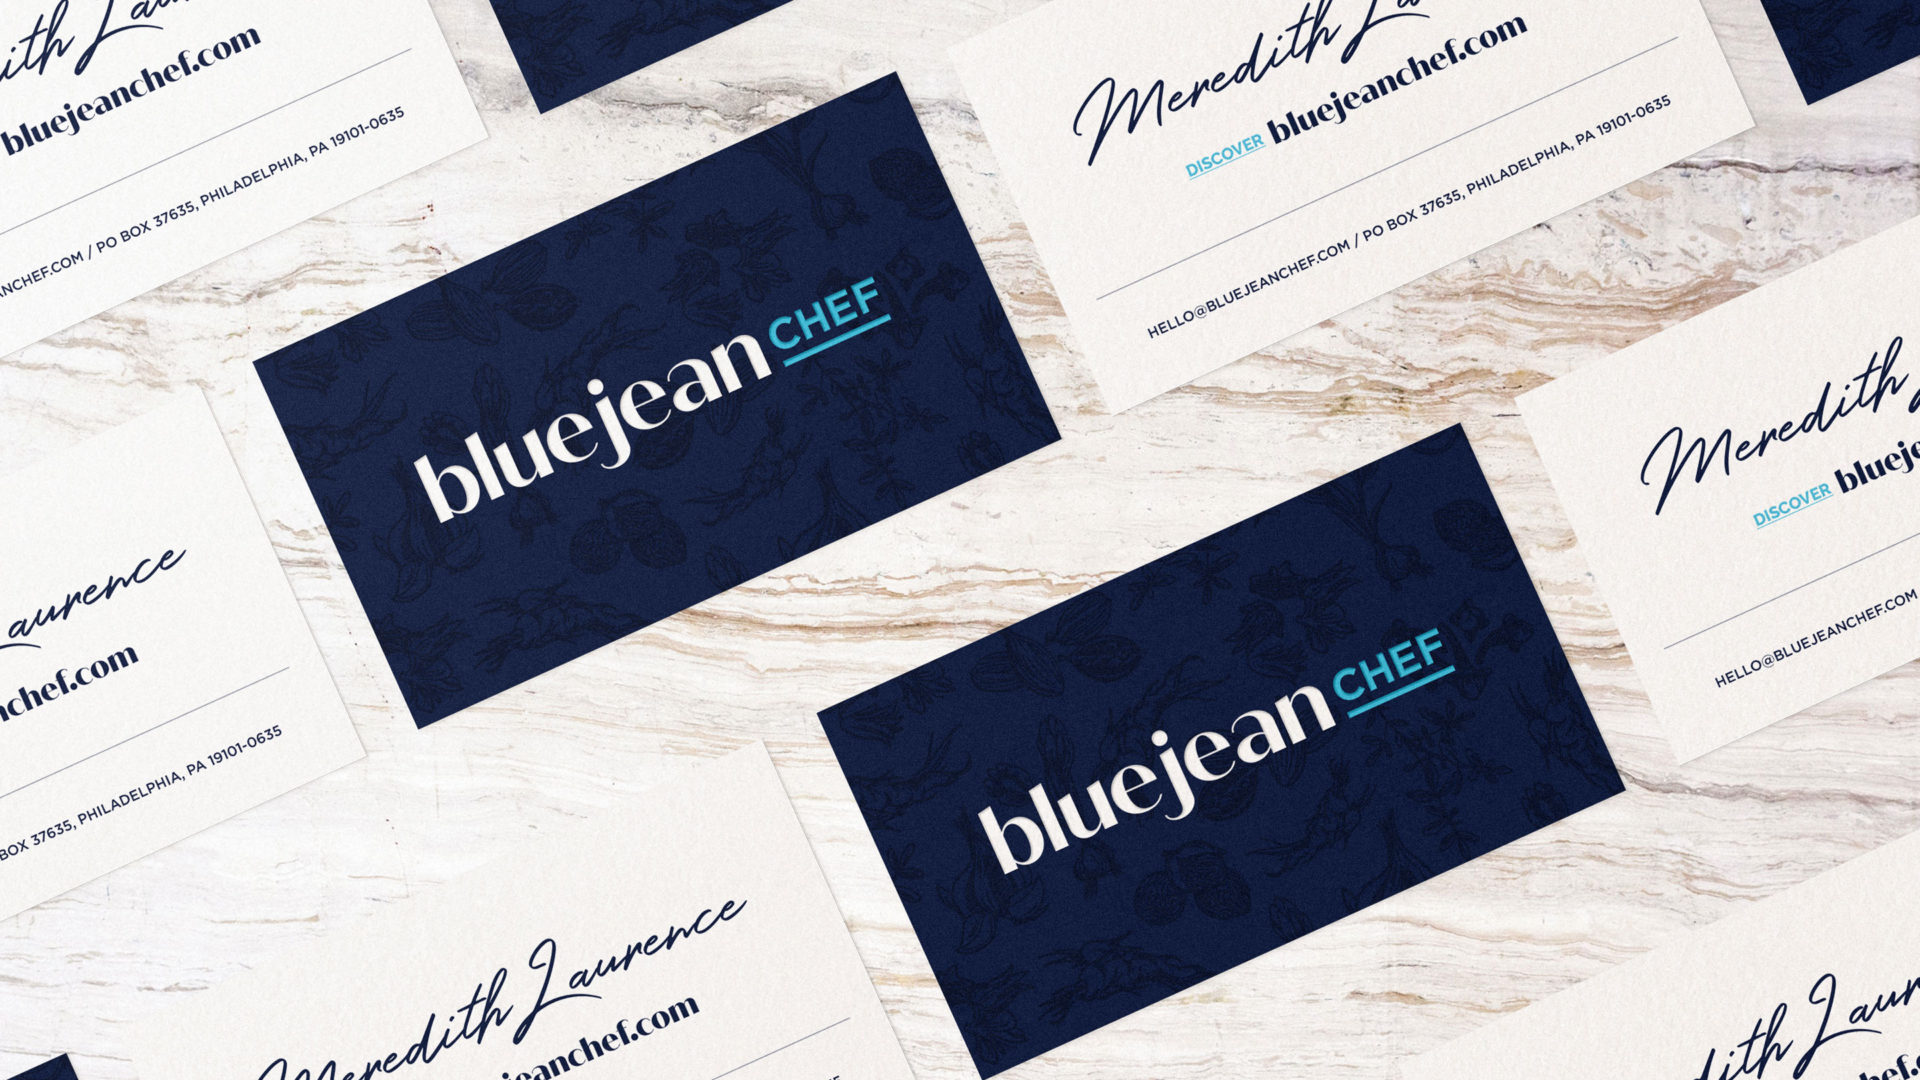 How to Choose an Air Fryer  Blue Jean Chef - Meredith Laurence